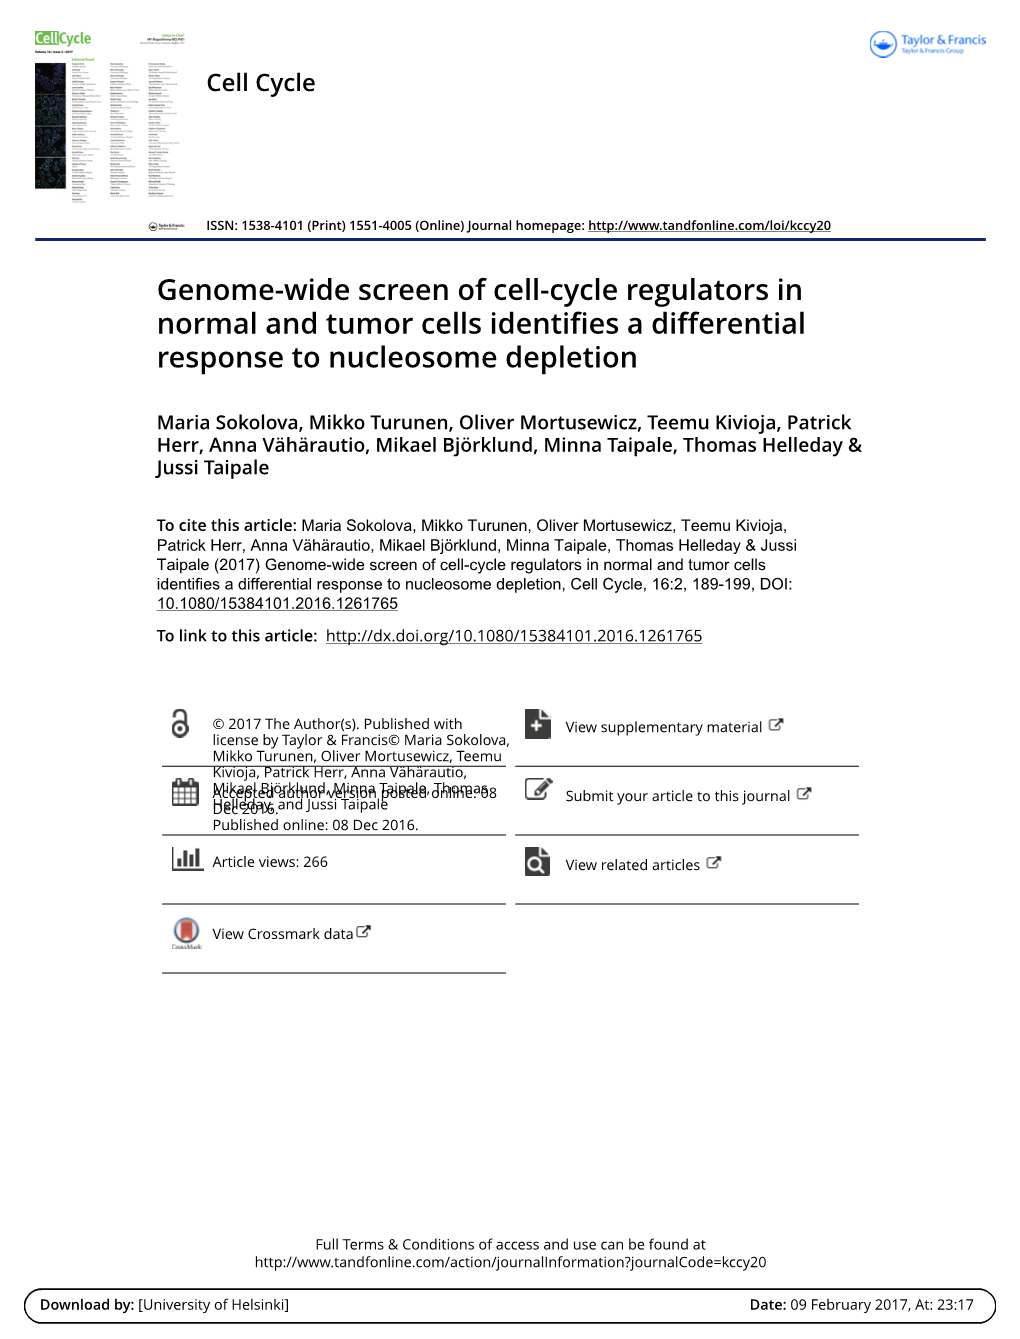 Genome-Wide Screen of Cell-Cycle Regulators in Normal and Tumor Cells Identifies a Differential Response to Nucleosome Depletion